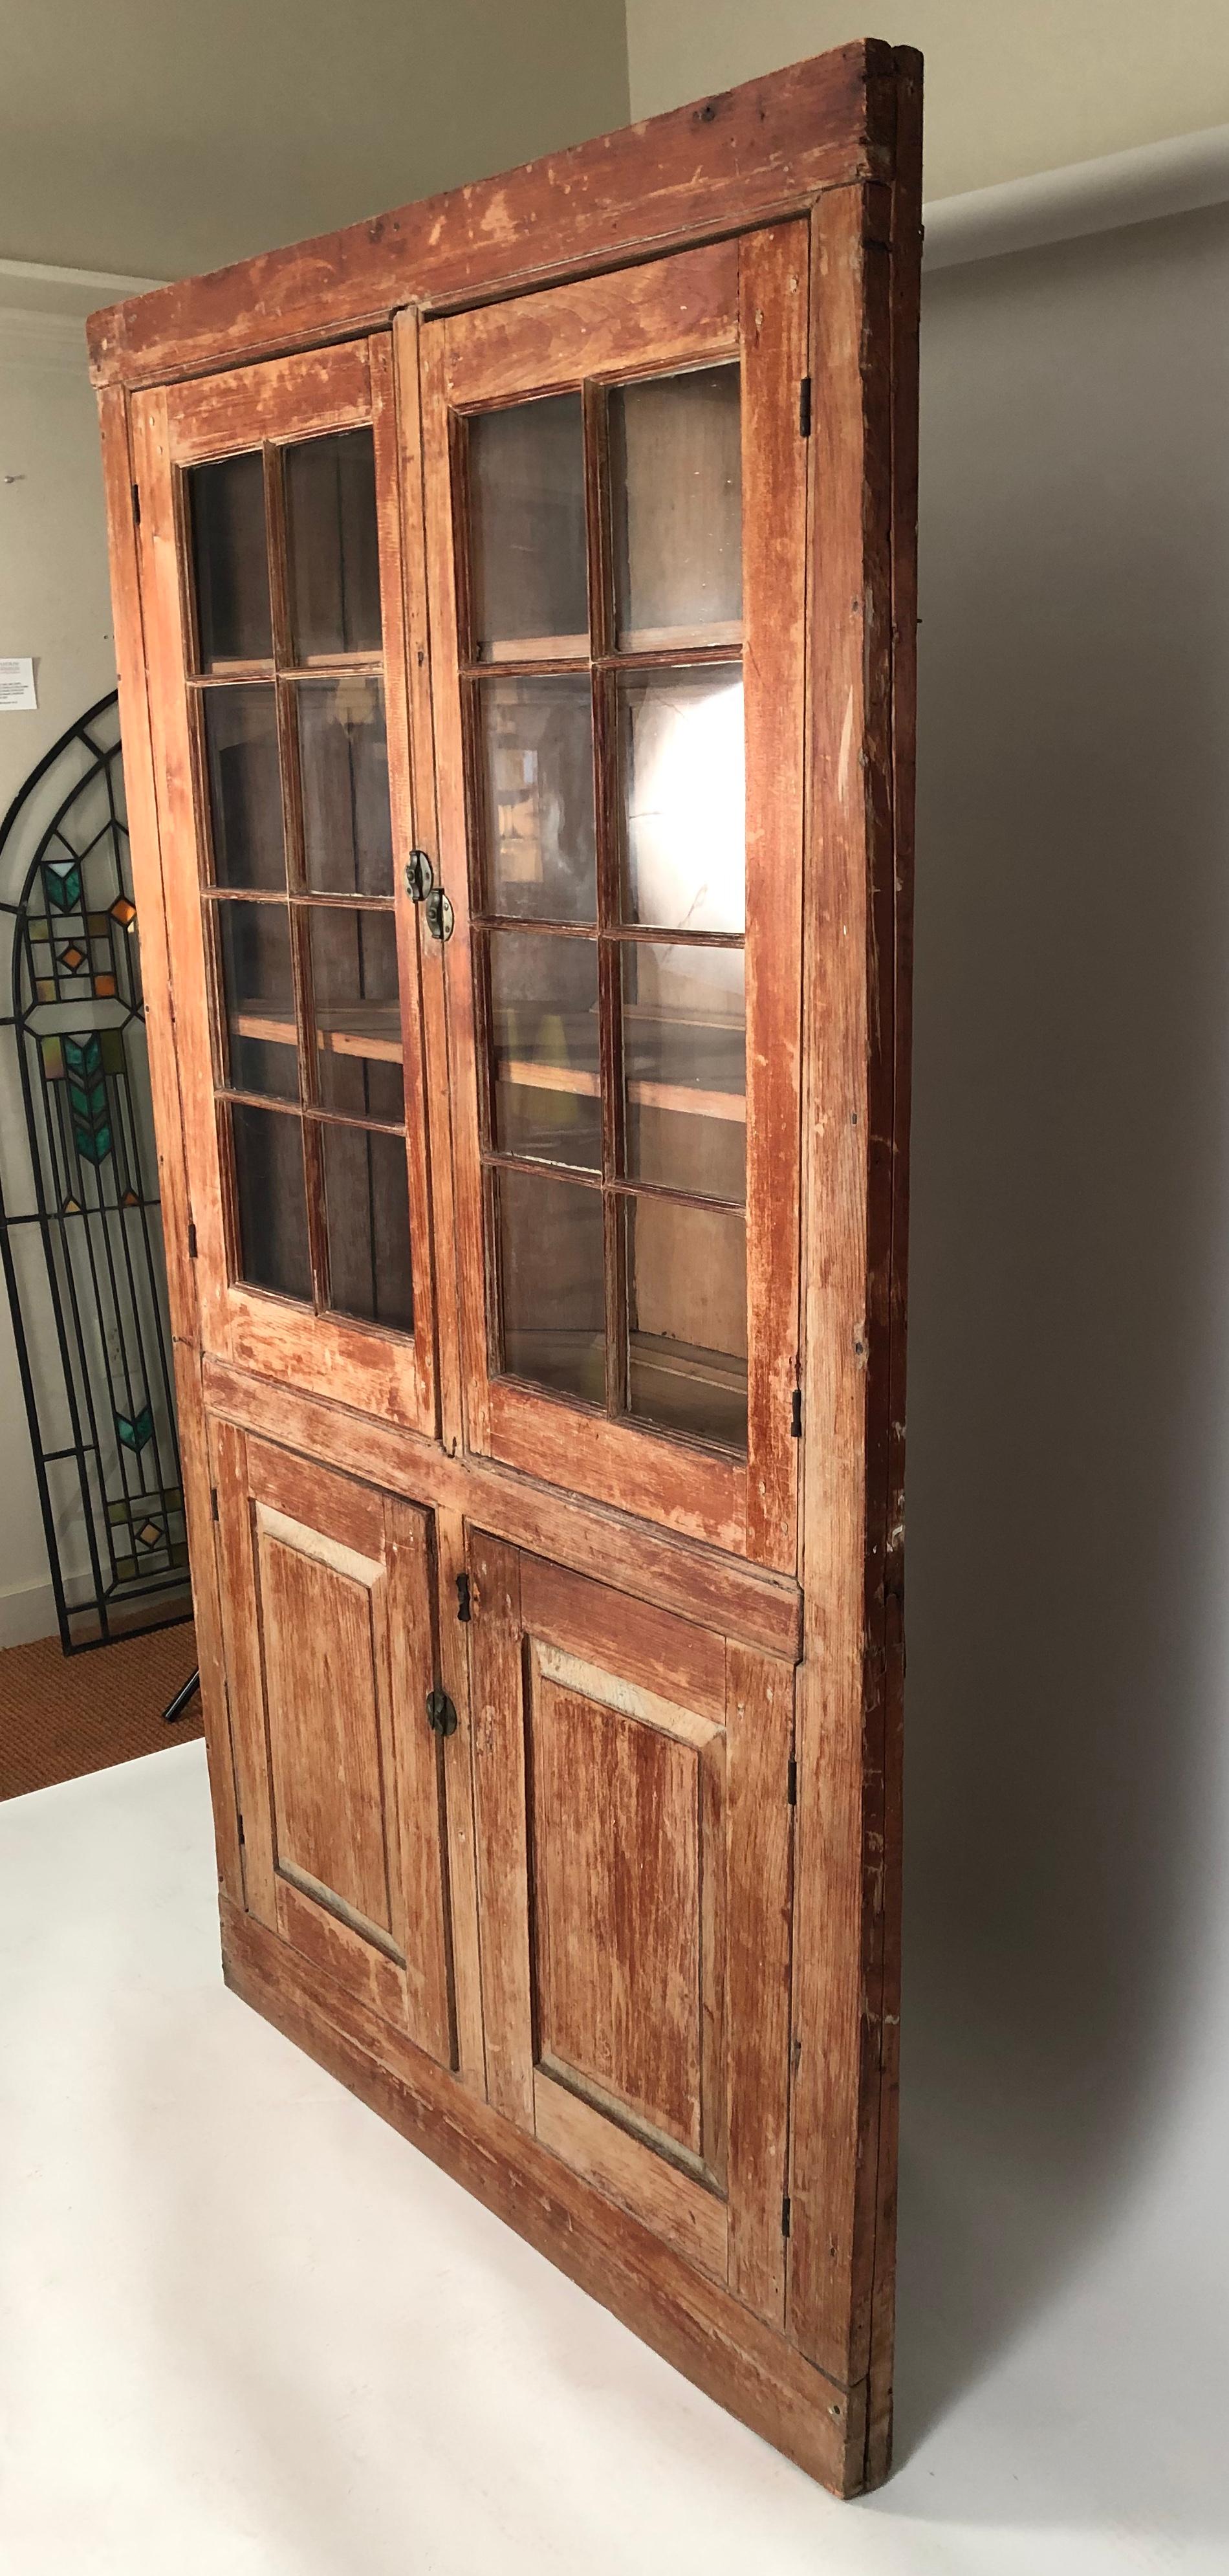 A 19th century American painted country corner cupboard, circa 1840, with wonderful old surface, in pine with layers of original old red and blue paint, in one piece, the upper section with two glazed doors enclosing three shelves, each with a plate